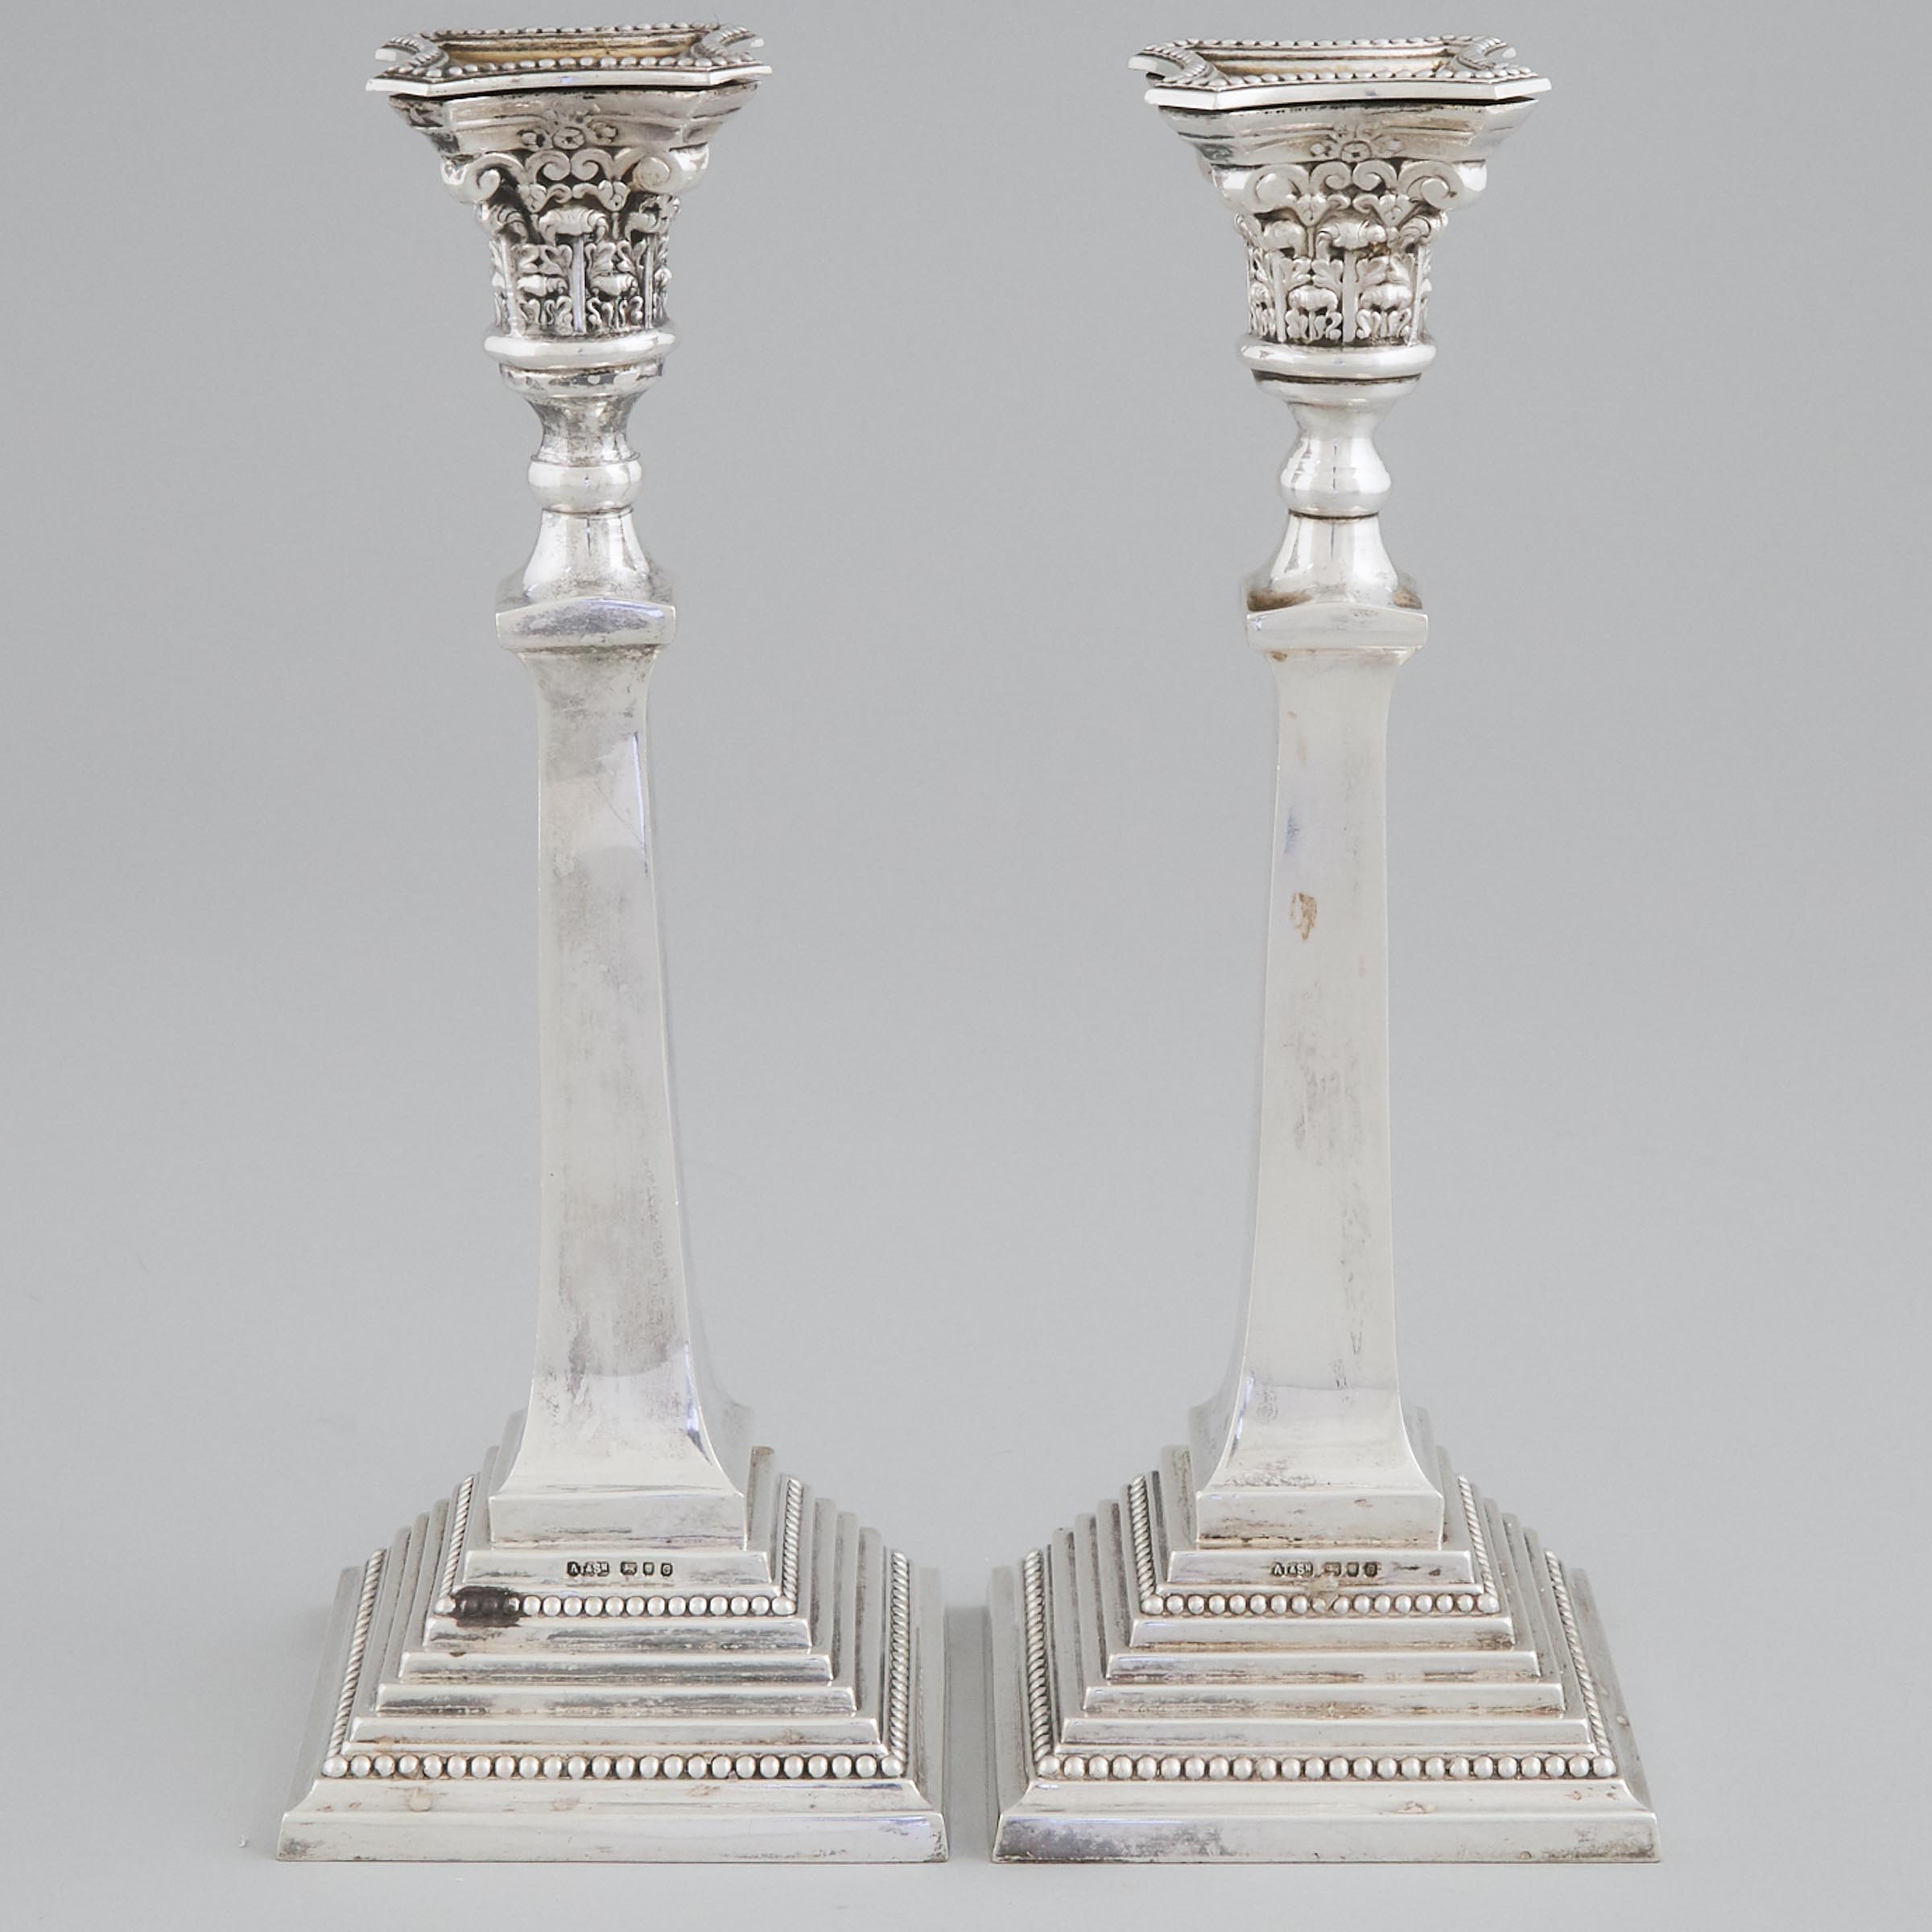 Pair of English Silver Table Candlesticks, probably A. Taite & Sons, London, 1960